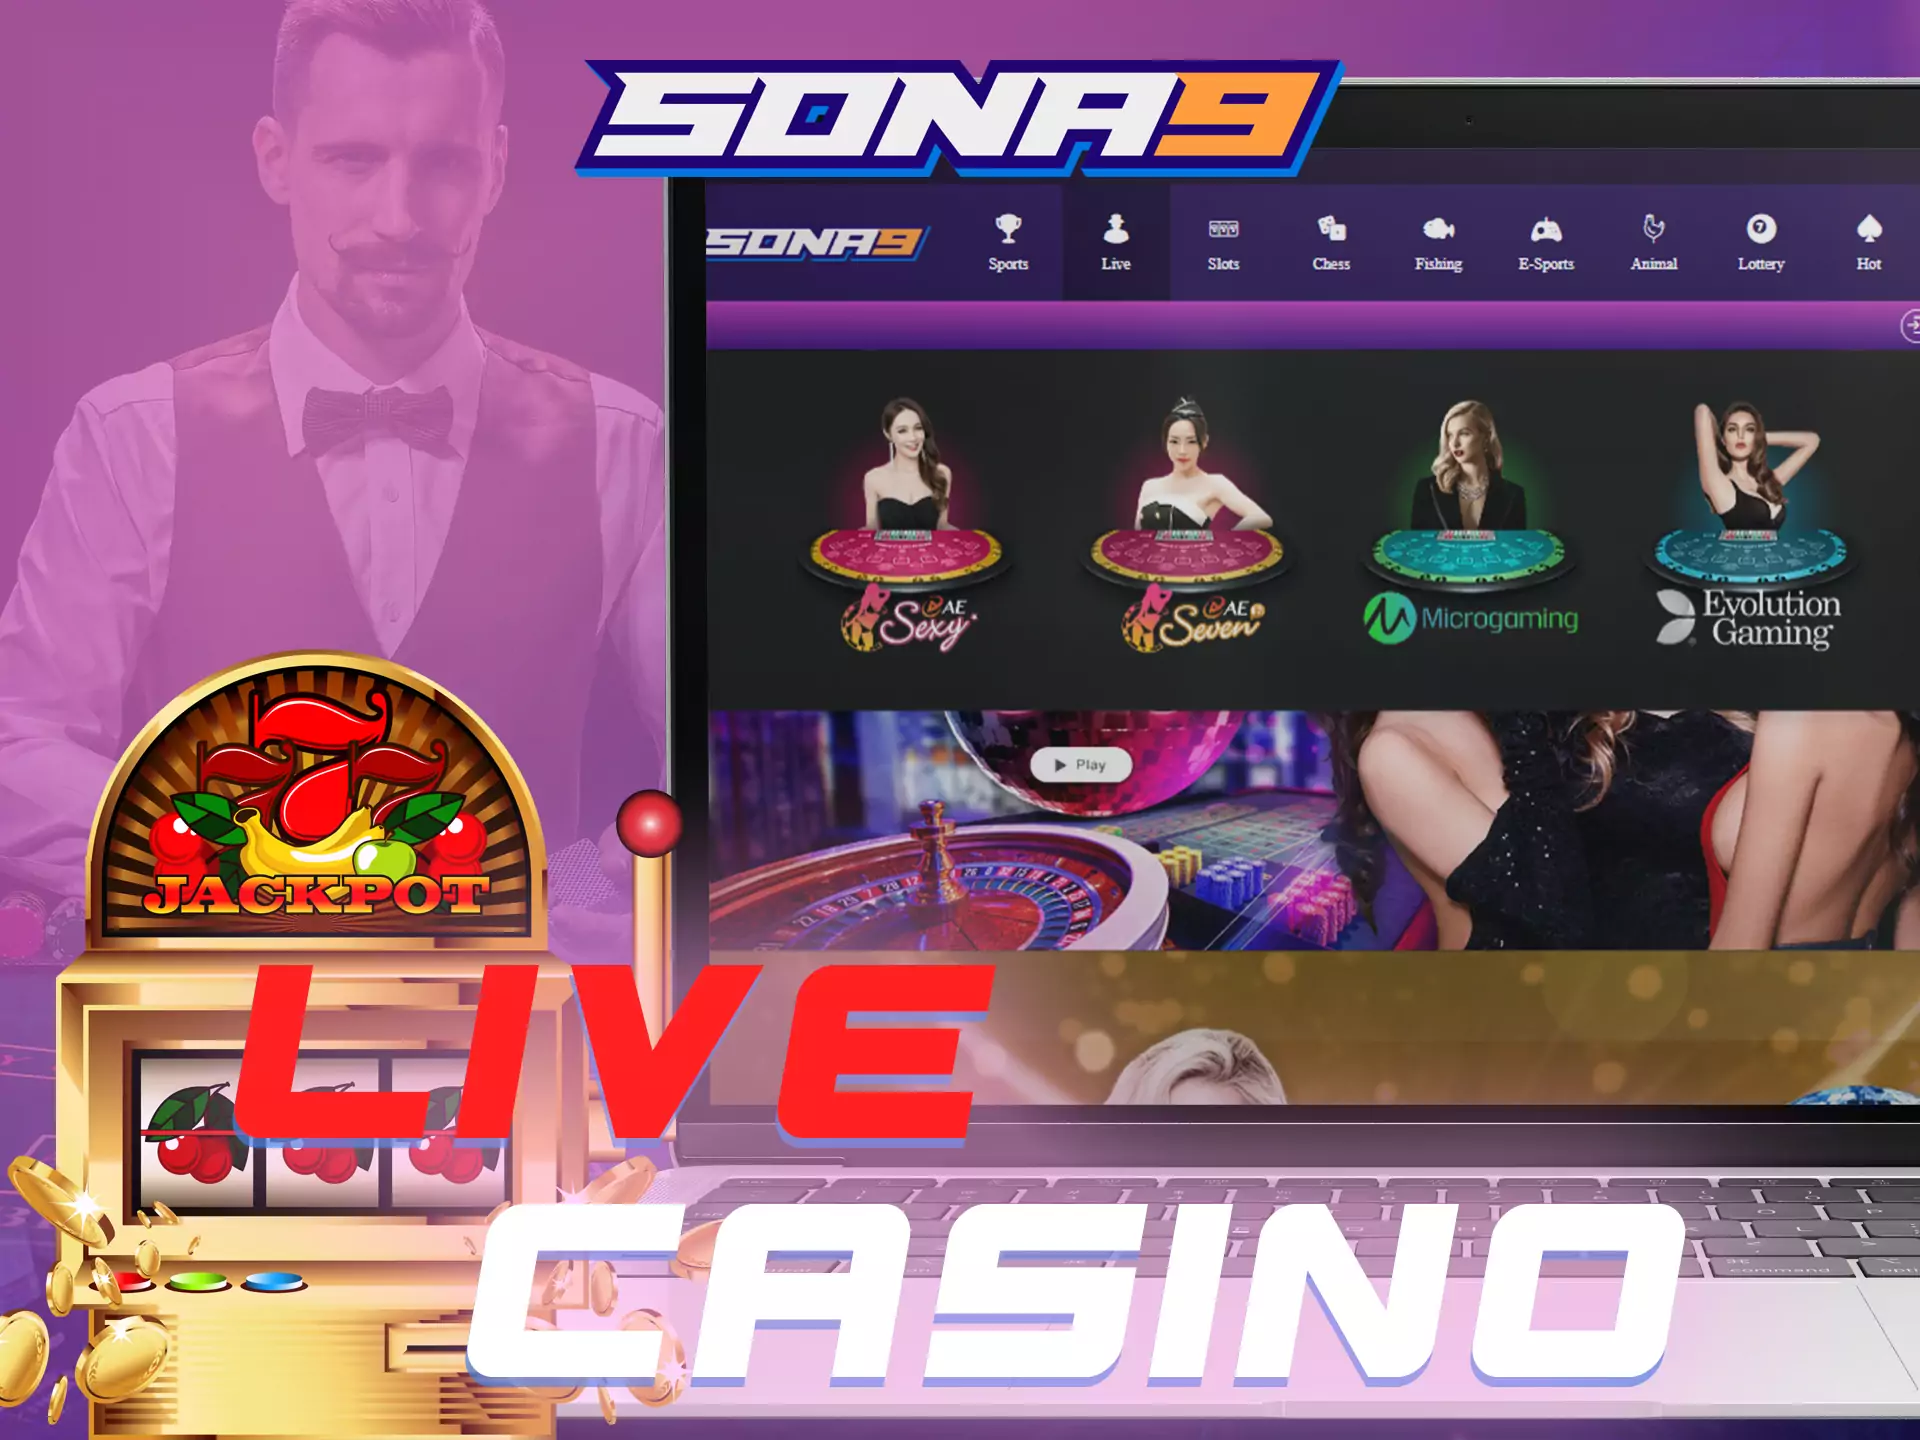 To meet real dealers, visit the Sona9 live casino.